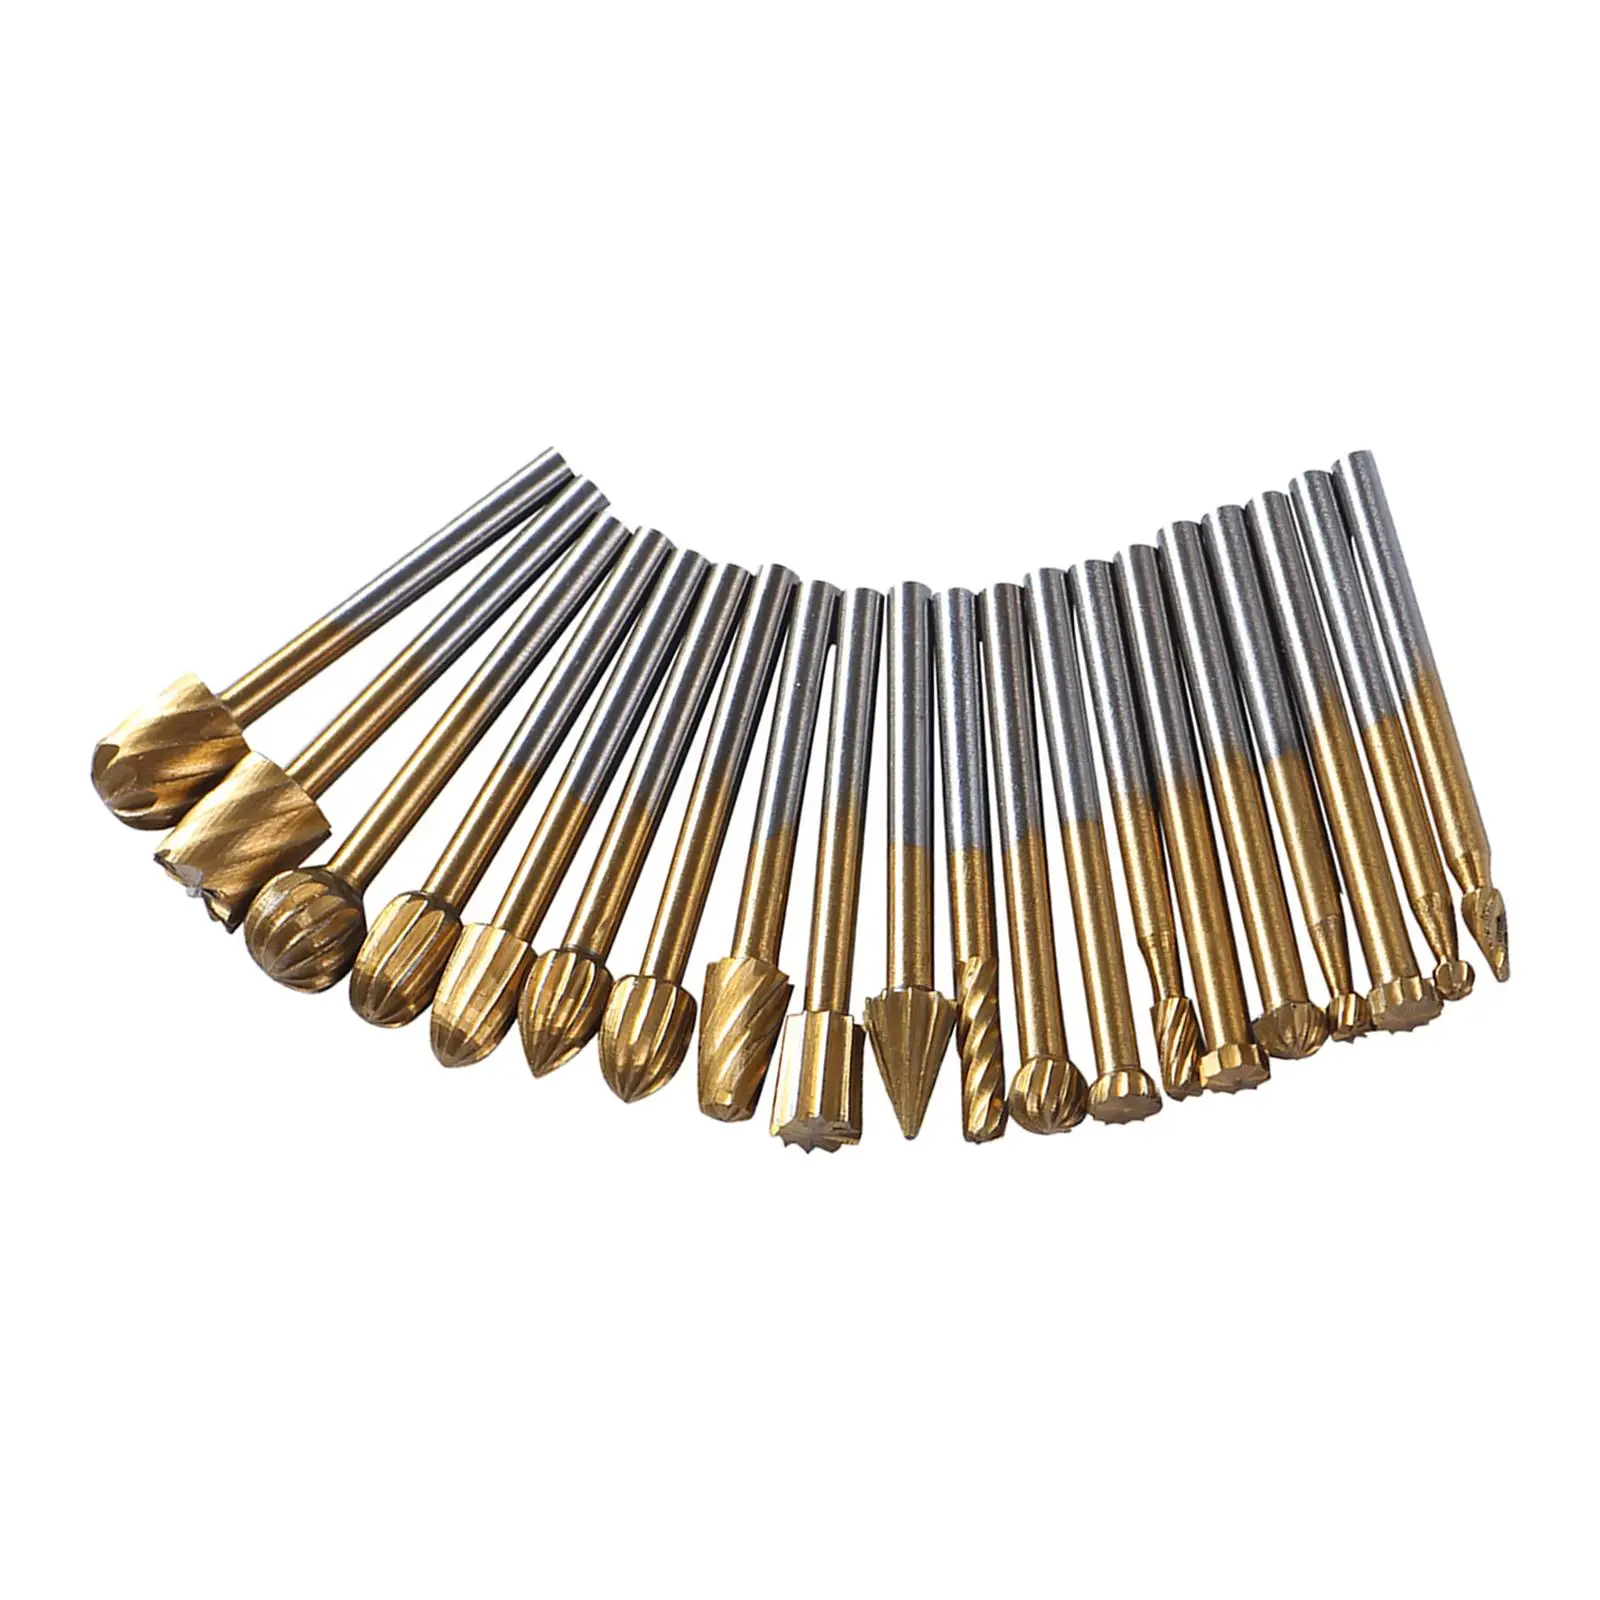 20x Rotary Drill Set, Milling Cutter Power Tool Polishing Rotary Tools for Steel and Wood Working Drilling Sculpting DIY Jewelry